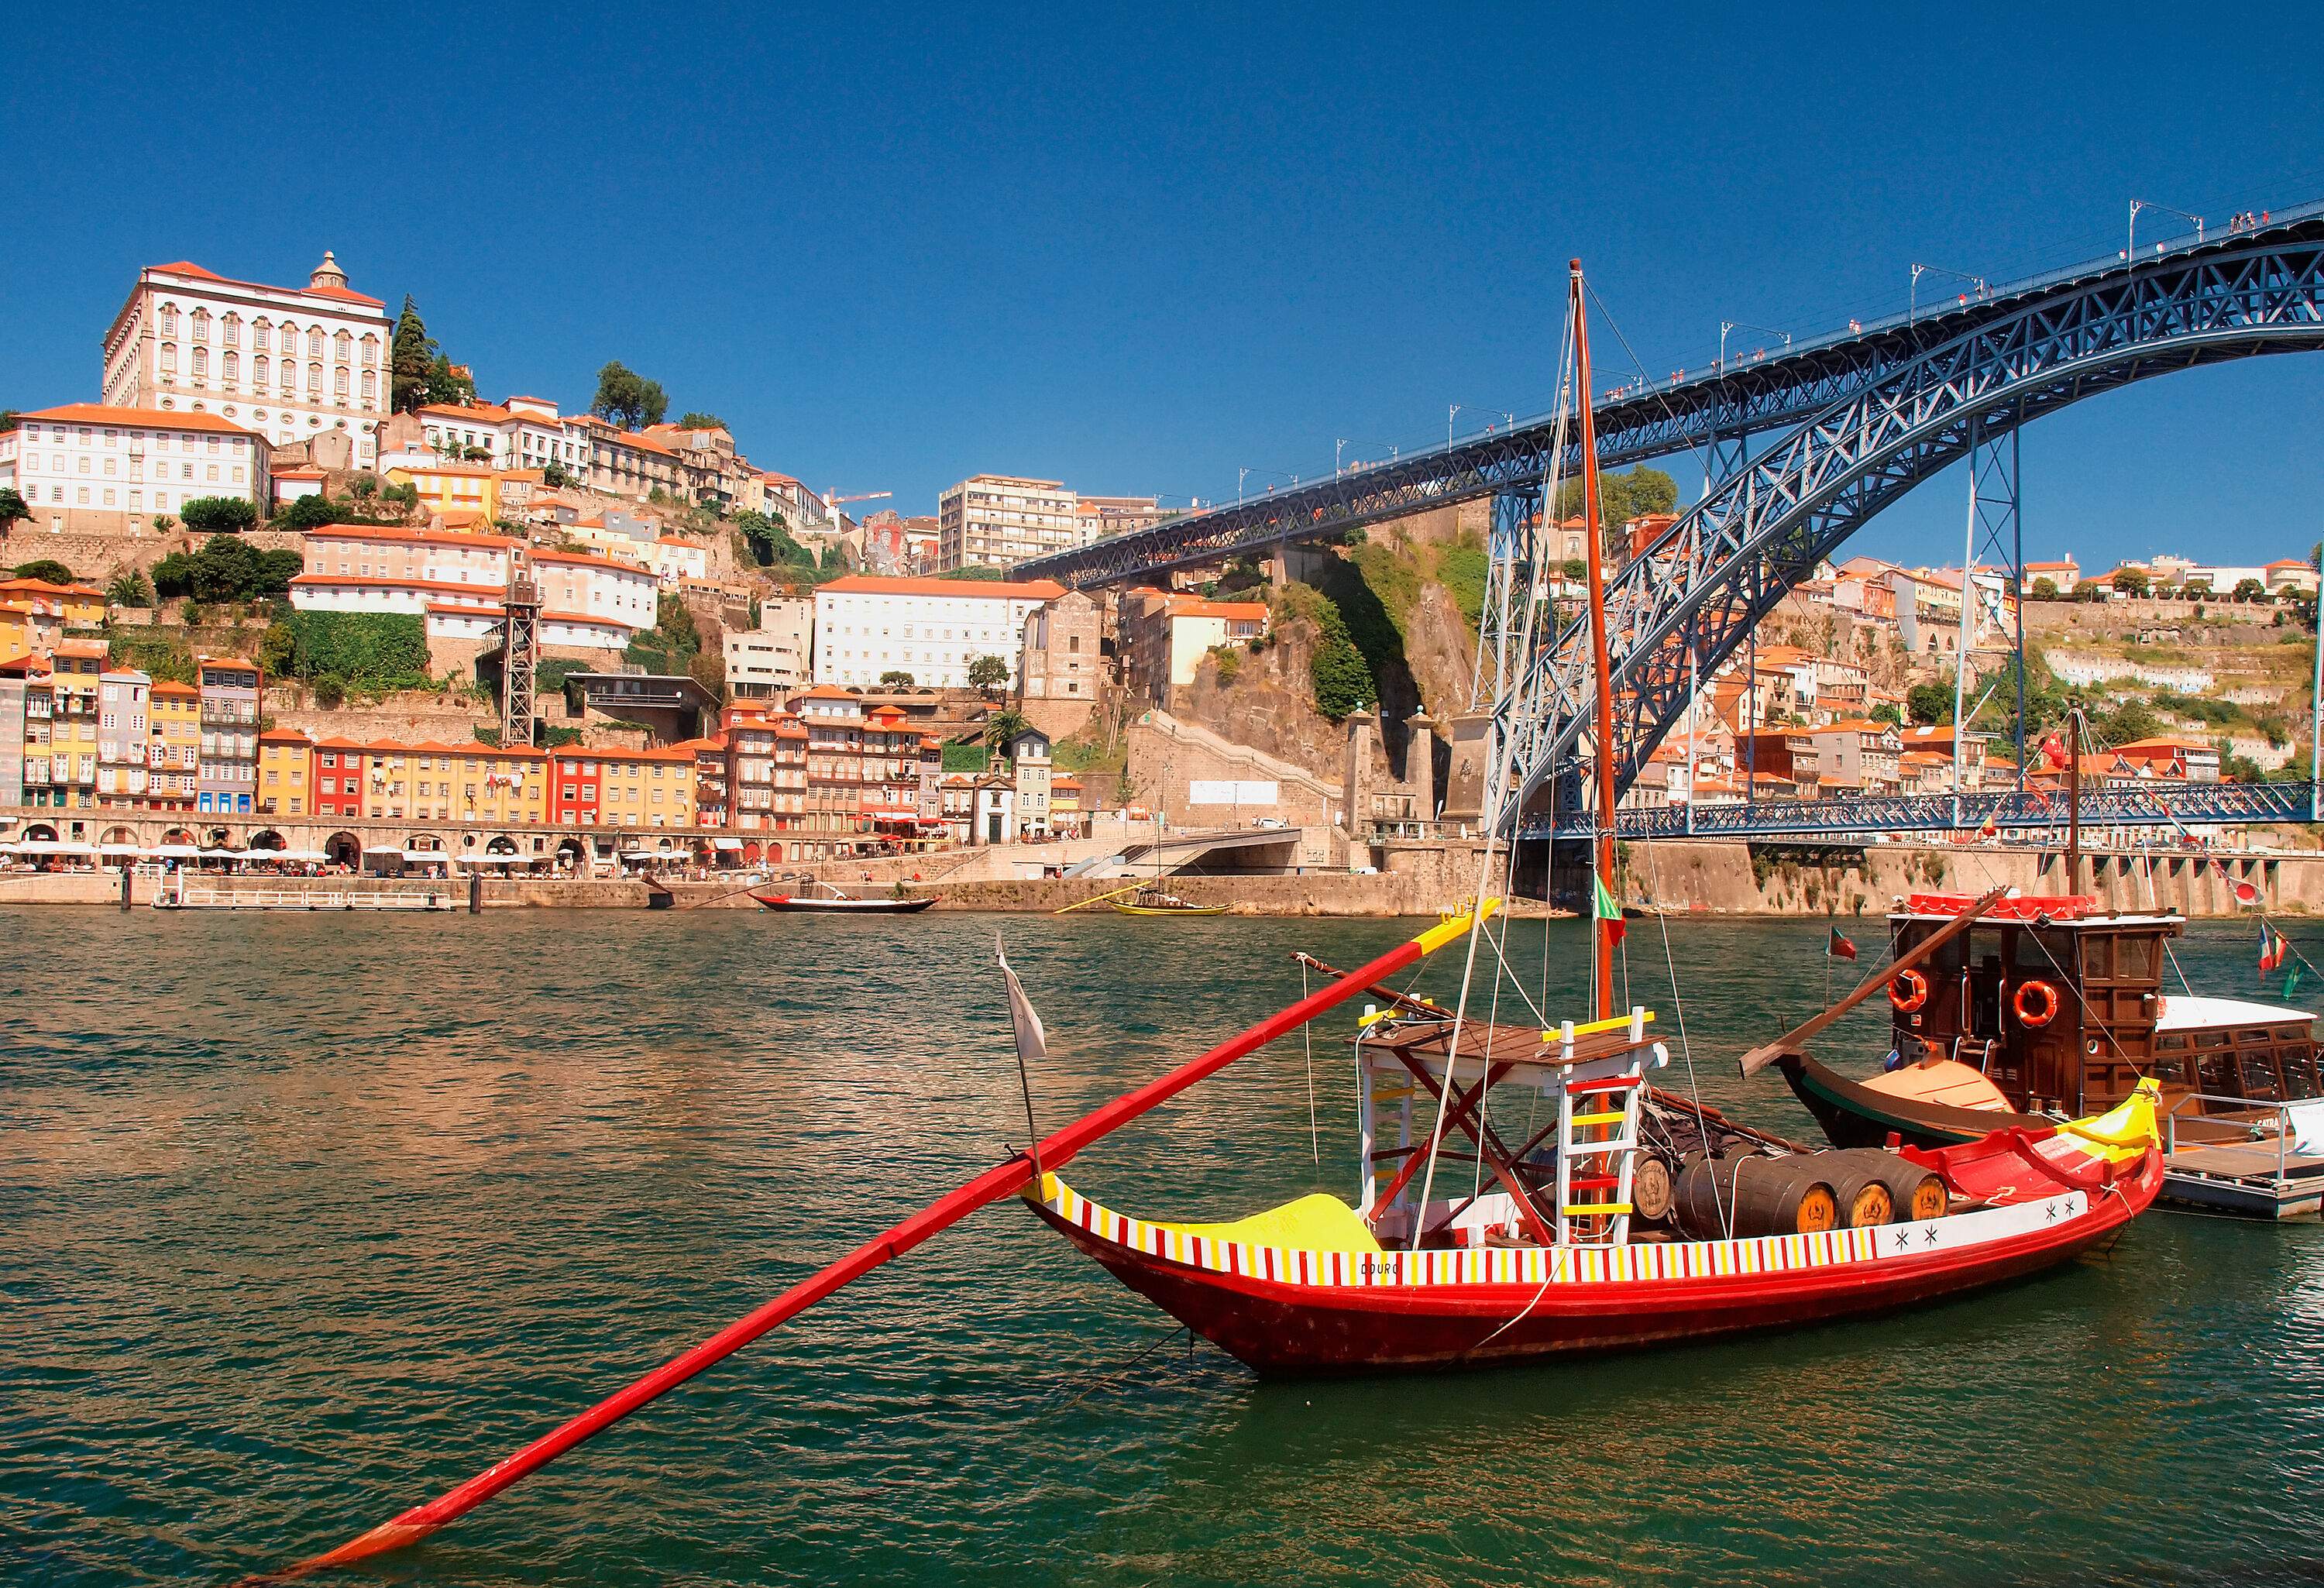 A rabelo boat about to pass the double-deck metal arch bridge across the river linked to a hill of tall buildings.